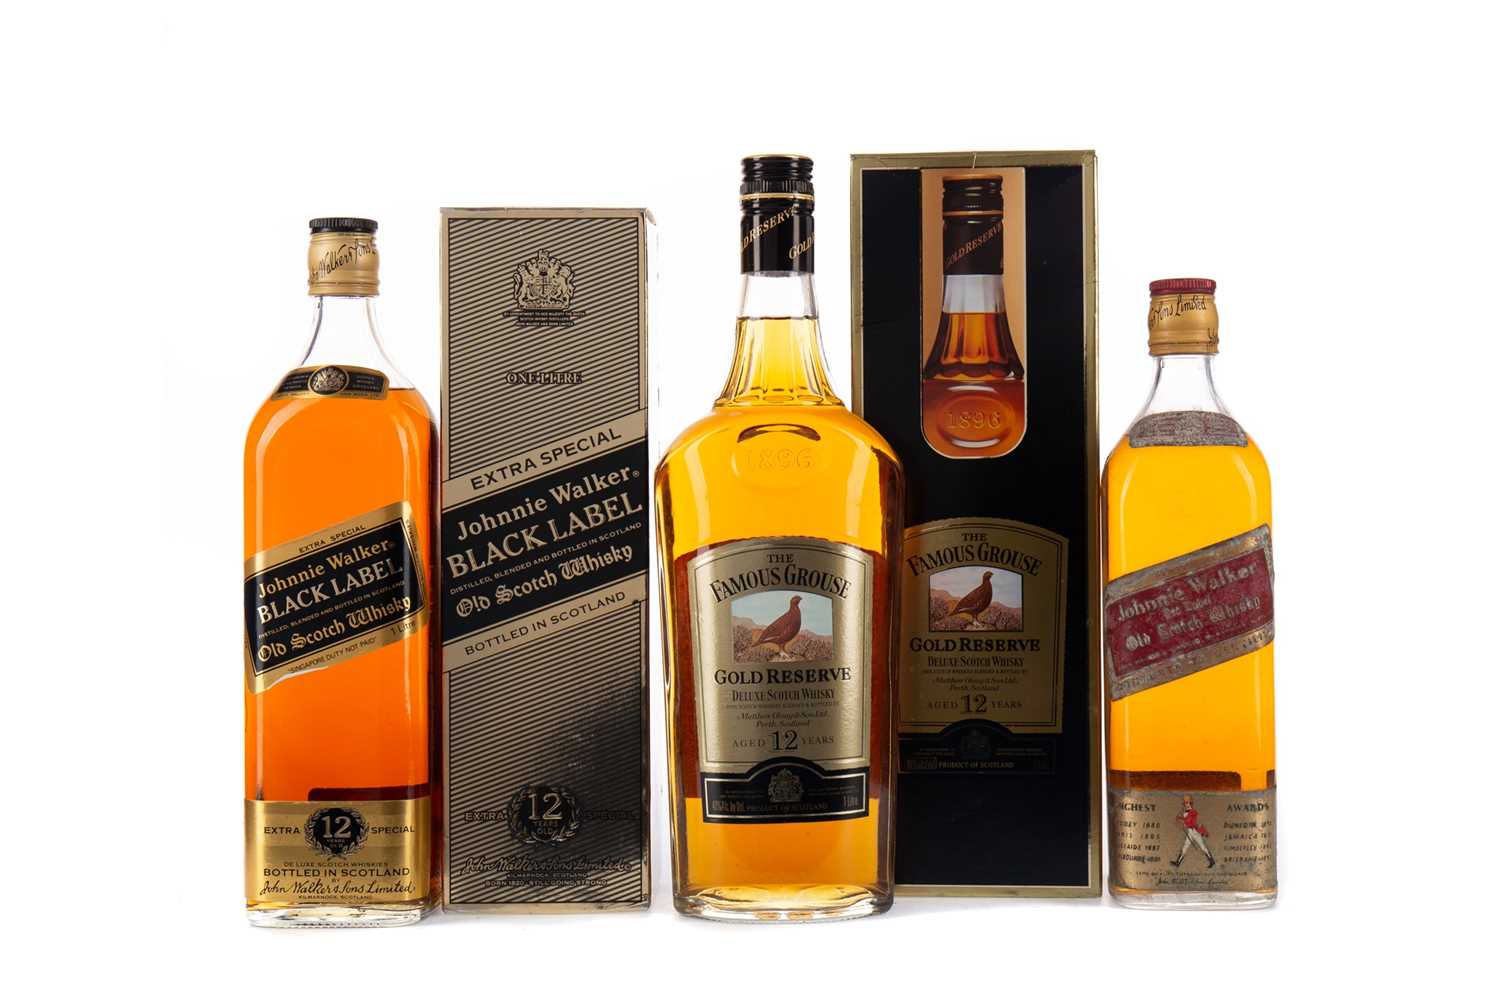 Lot 82 - FAMOUS GROUSE GOLD RESERVE AGED 12 YEARS. JOHNNIE WALKER BLACK LABEL AGED 12 YEARS, AND JOHNNIE WALKER RED LABEL